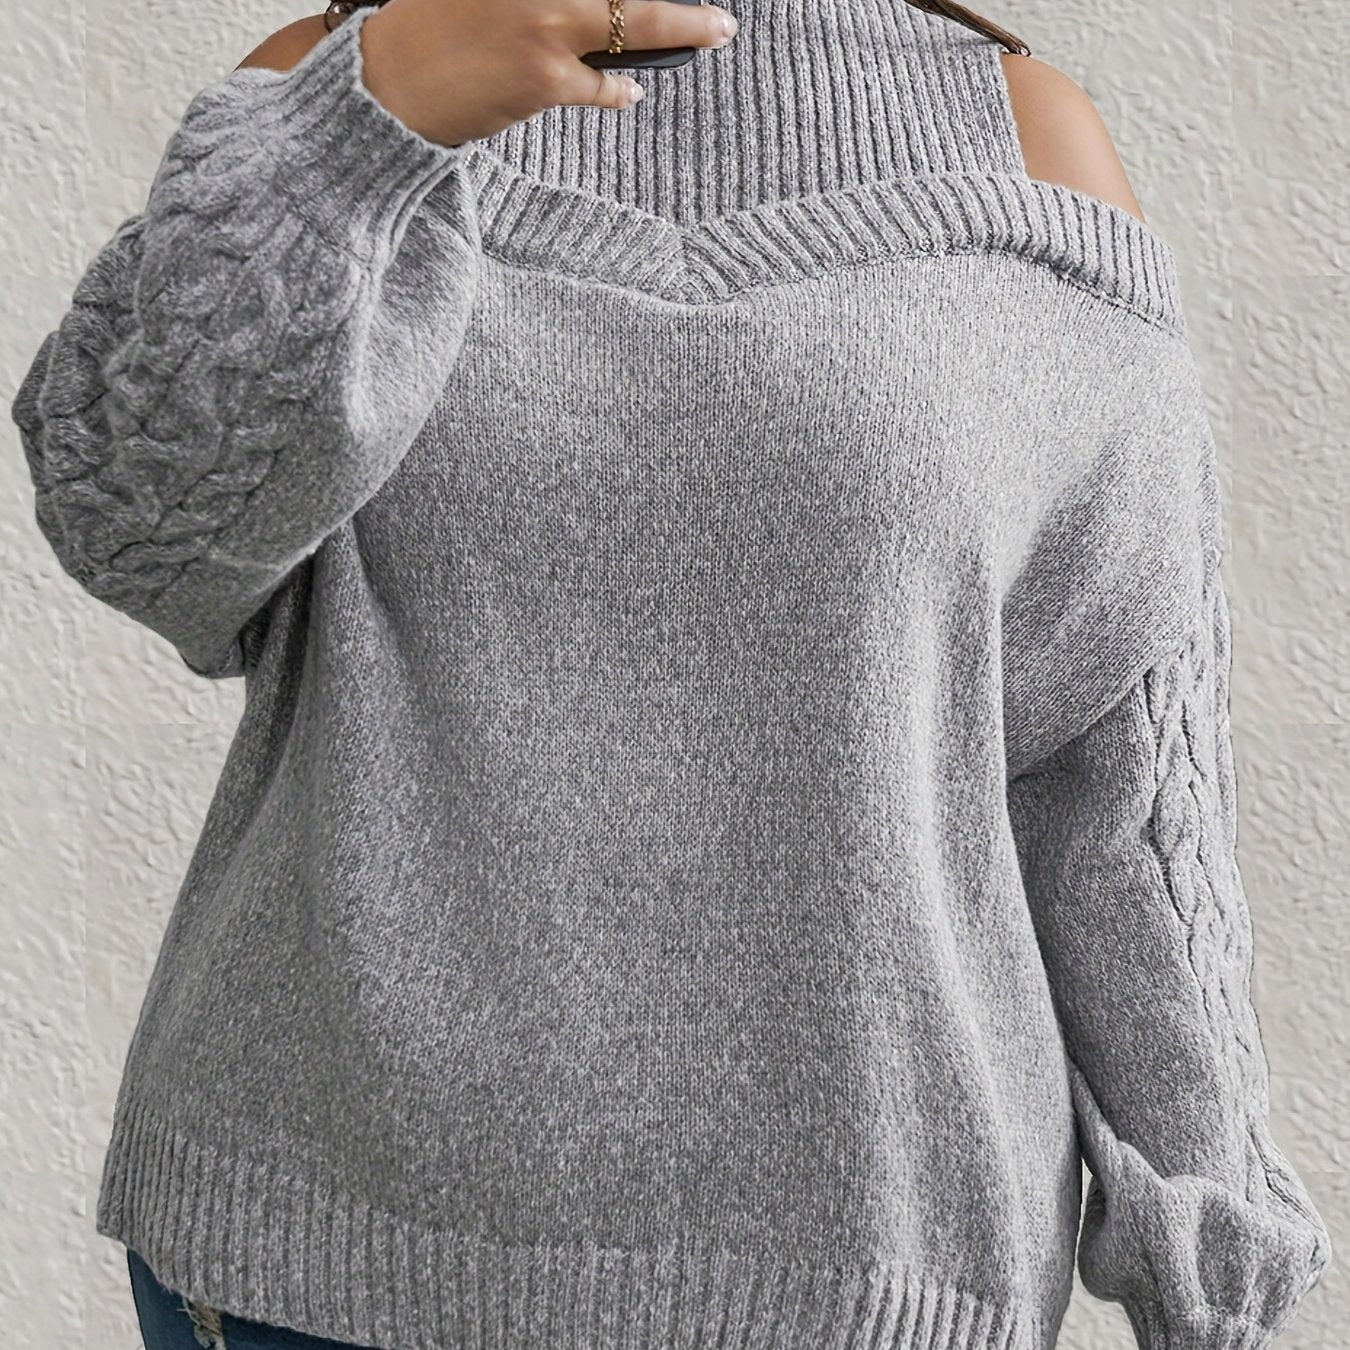 gbolsos   Plus Size Turtle Neck Cold Shoulder Jacquard Sweater, Women's Plus Casual Slight Stretch Knitwear Tops